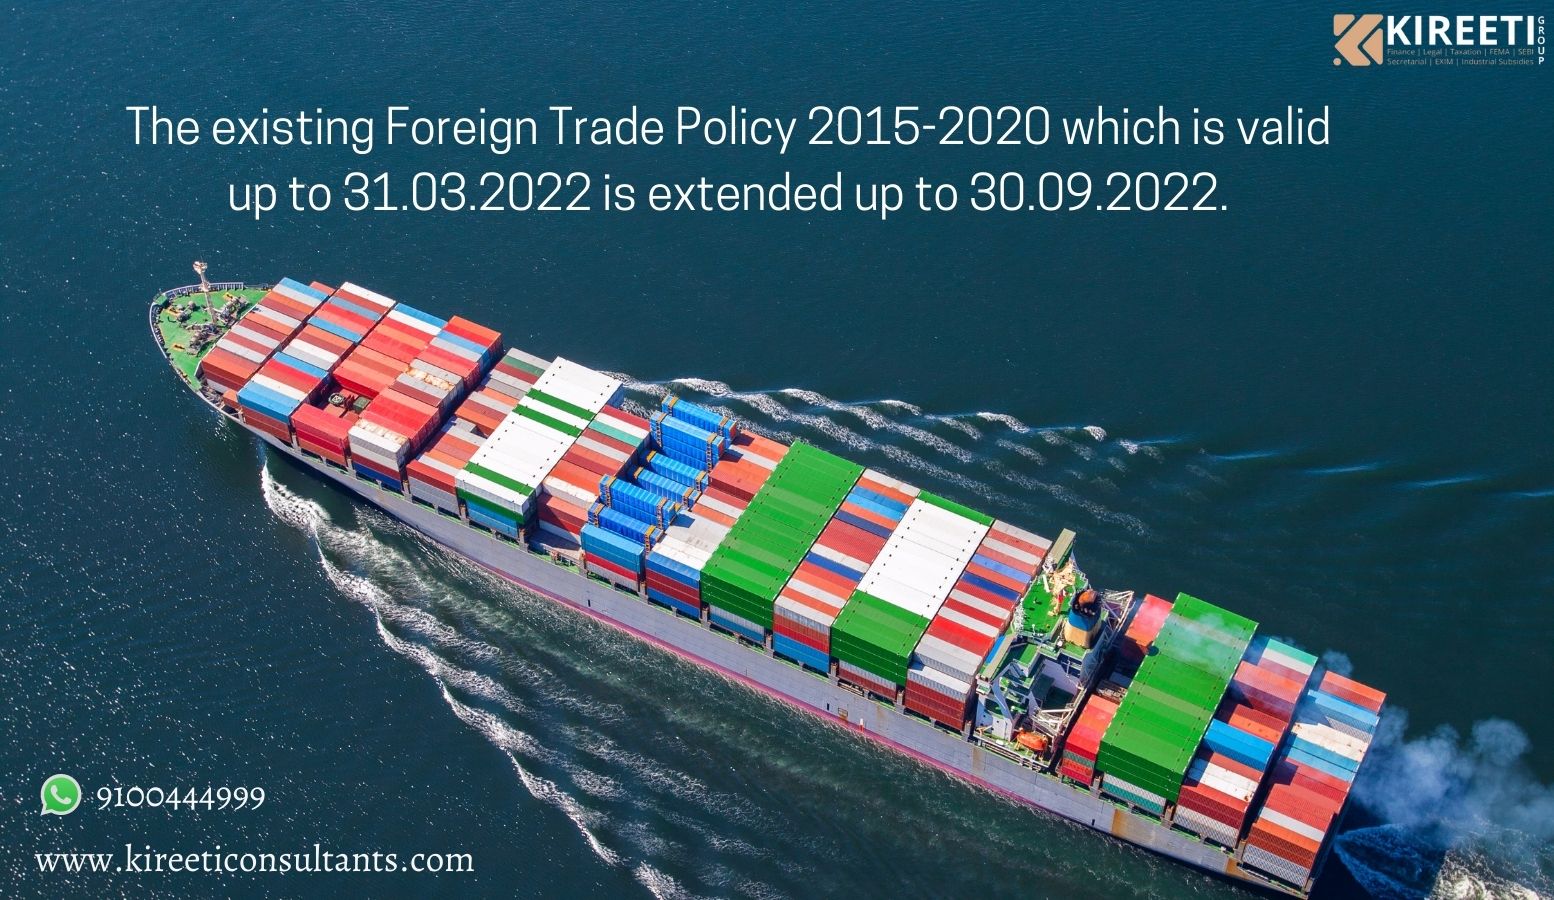 FTP, foreign trade policy, DGFT, Trade, Export, Import, Kireeti consultants, 